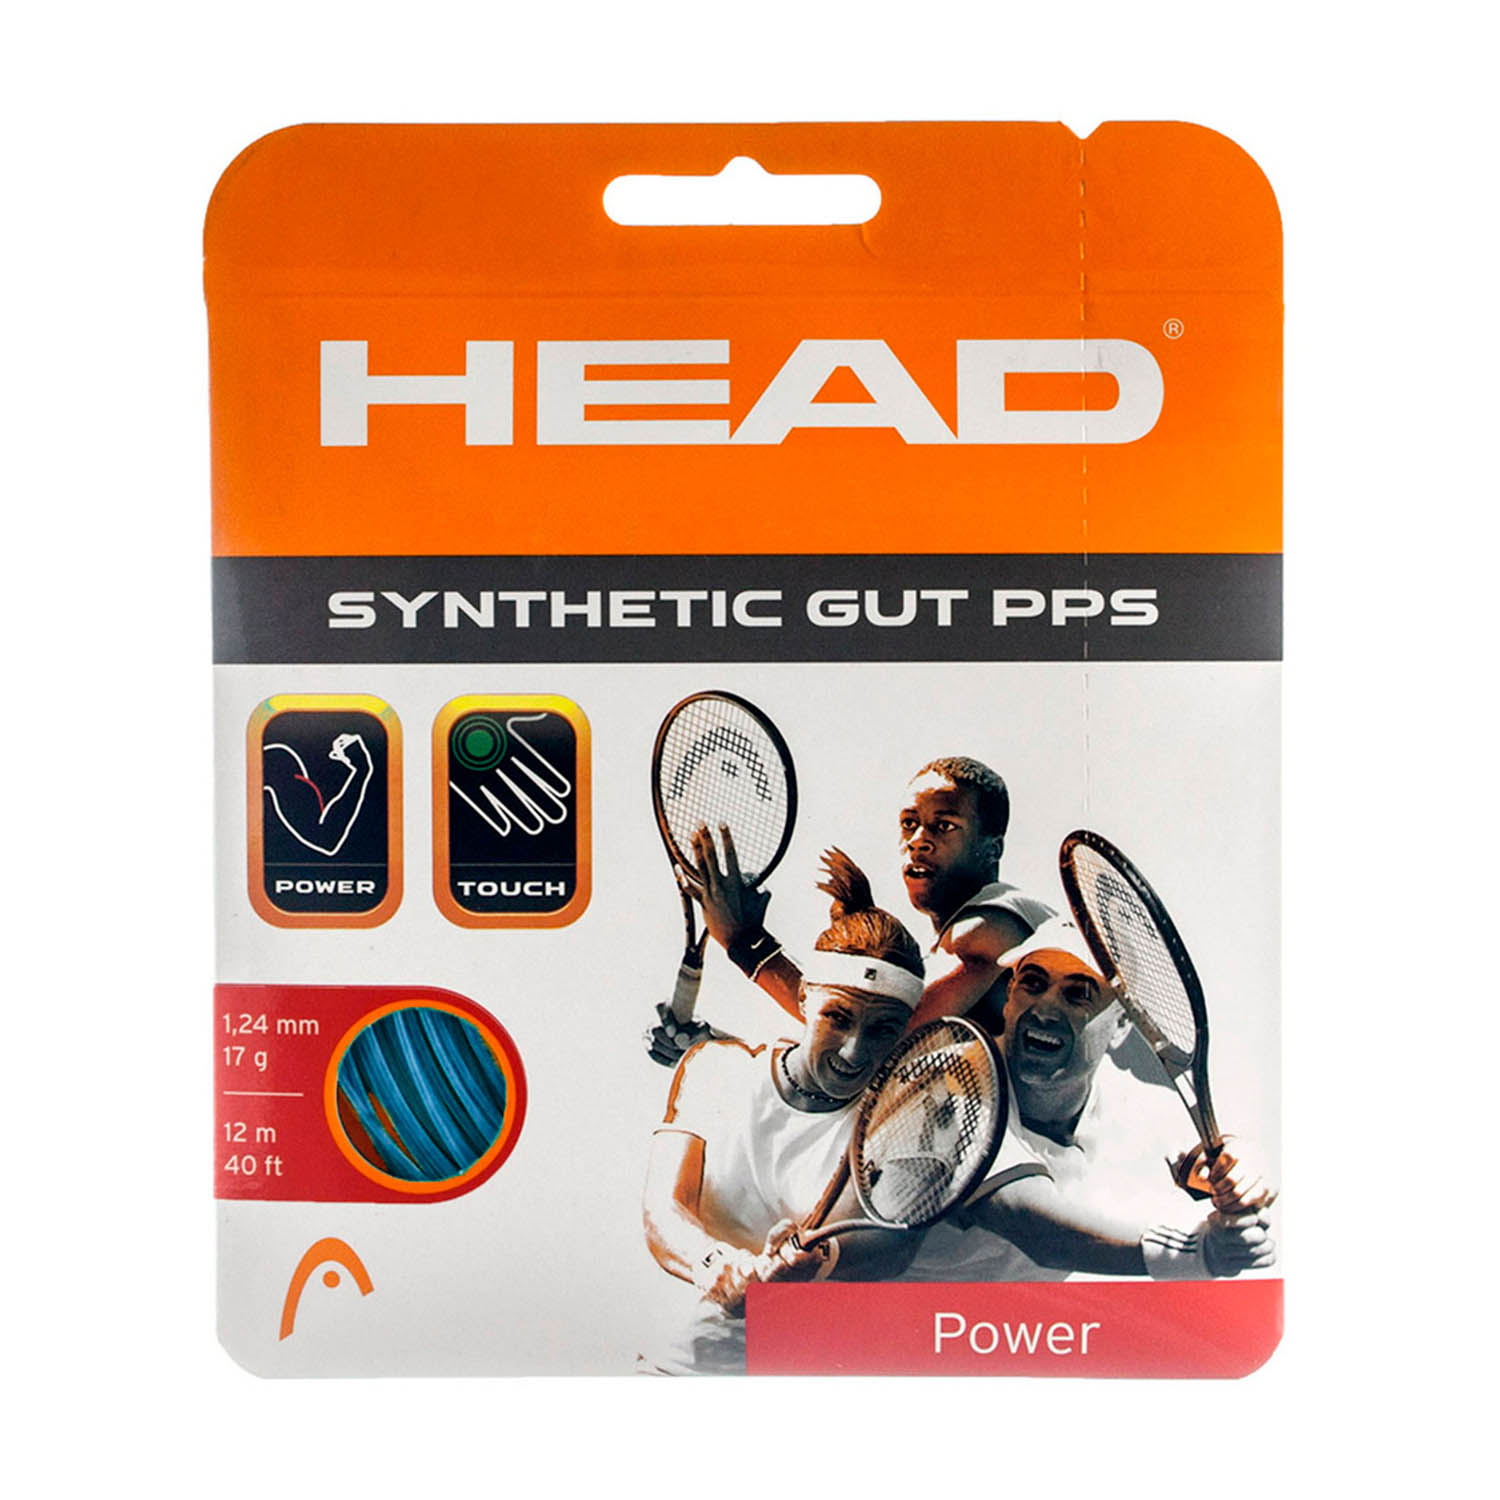 Head Synthetic Gut PPS 1.24 Set 12 m - Blue